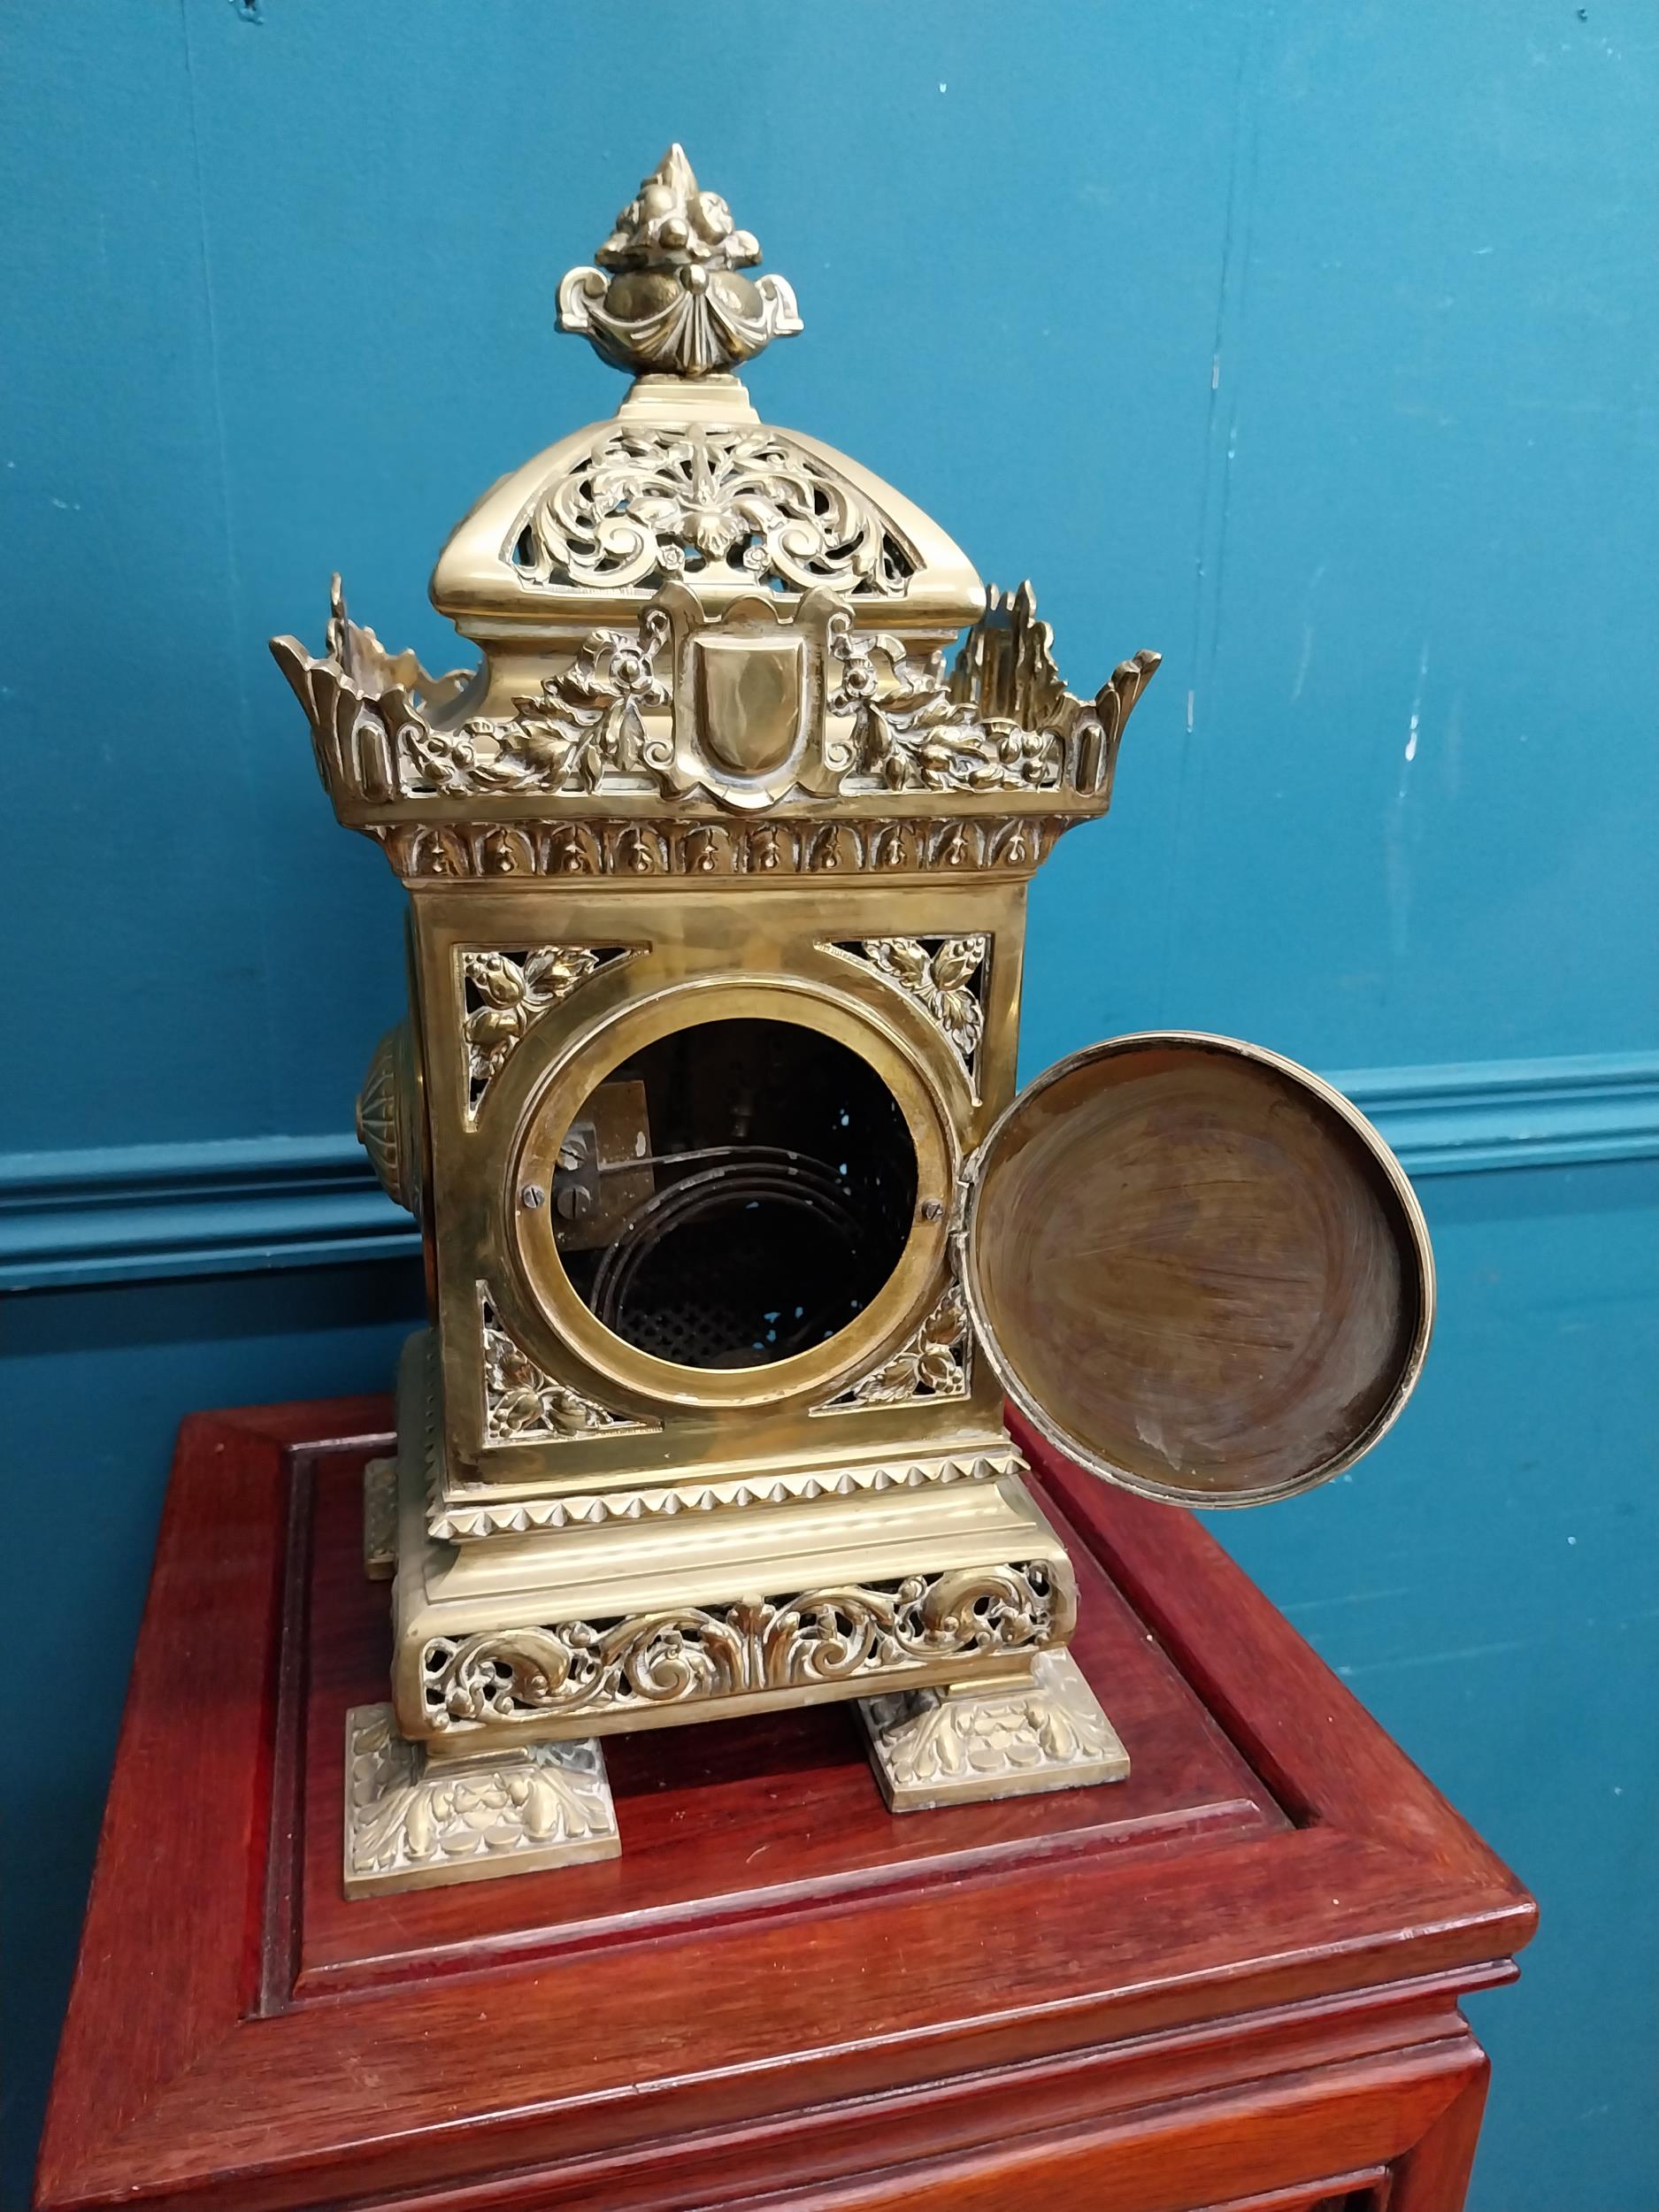 Decorative brass mantle clock in the Victorian style {39 cm H x 19 cm W x 19 cm D}. - Image 9 of 9